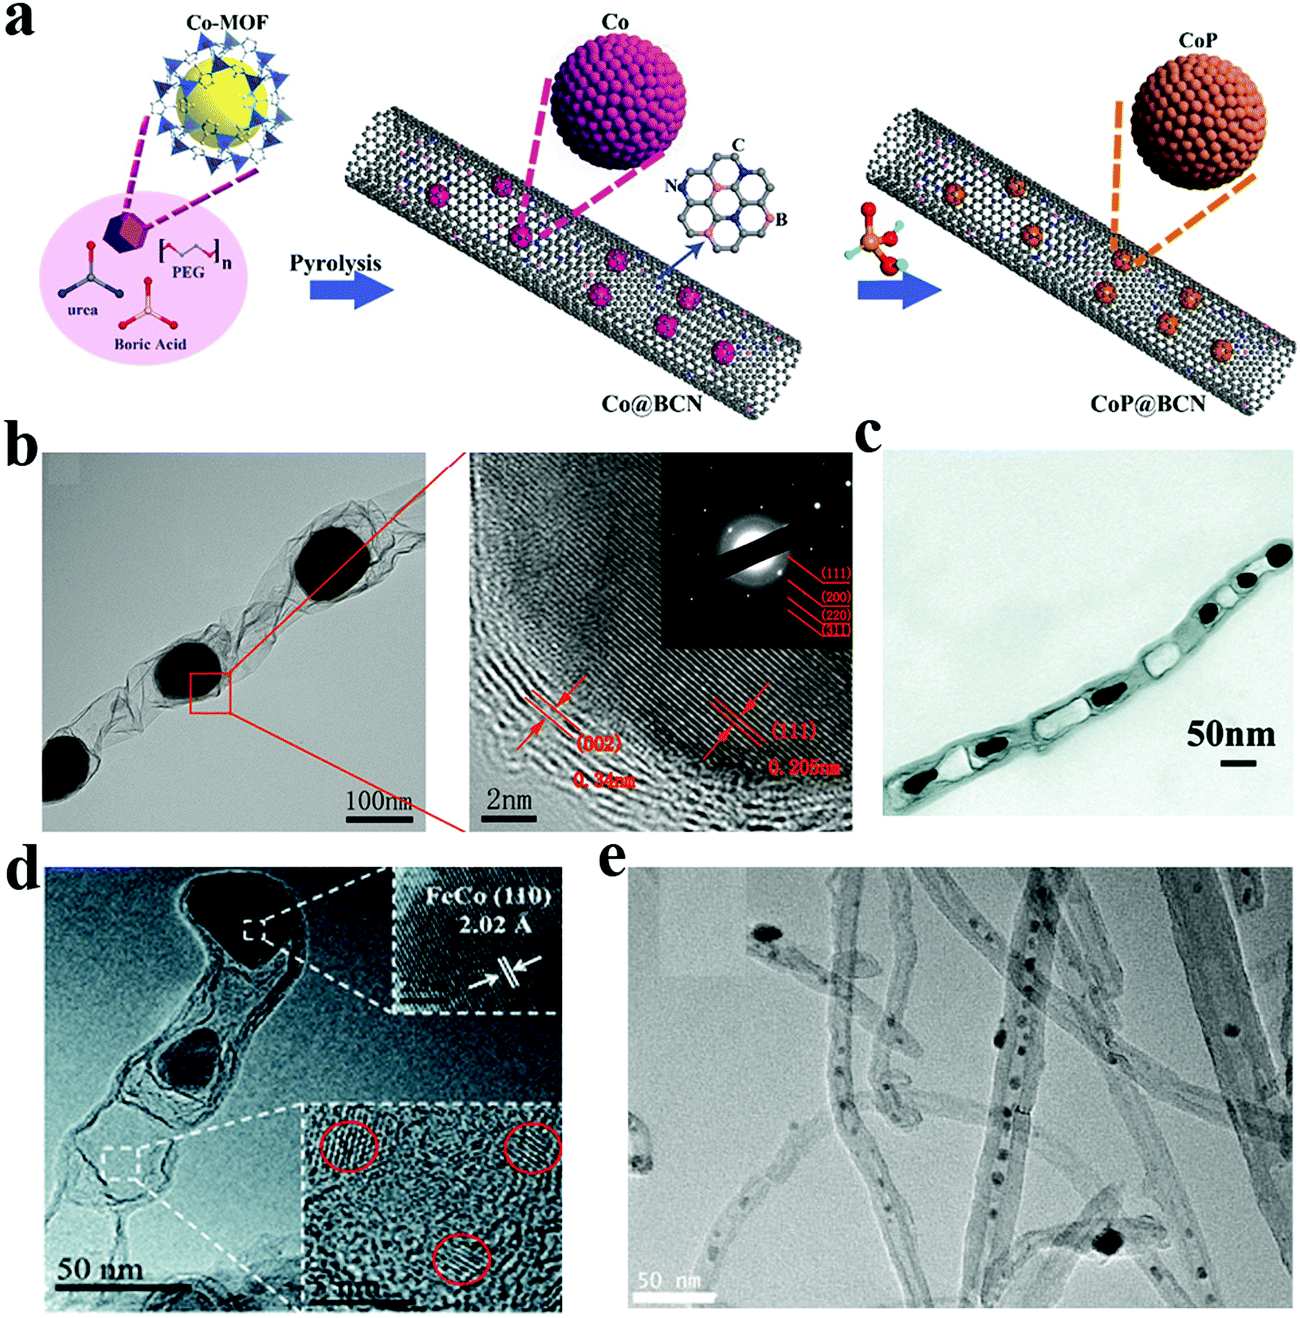 Recent advances in confining metal-based nanoparticles into carbon 